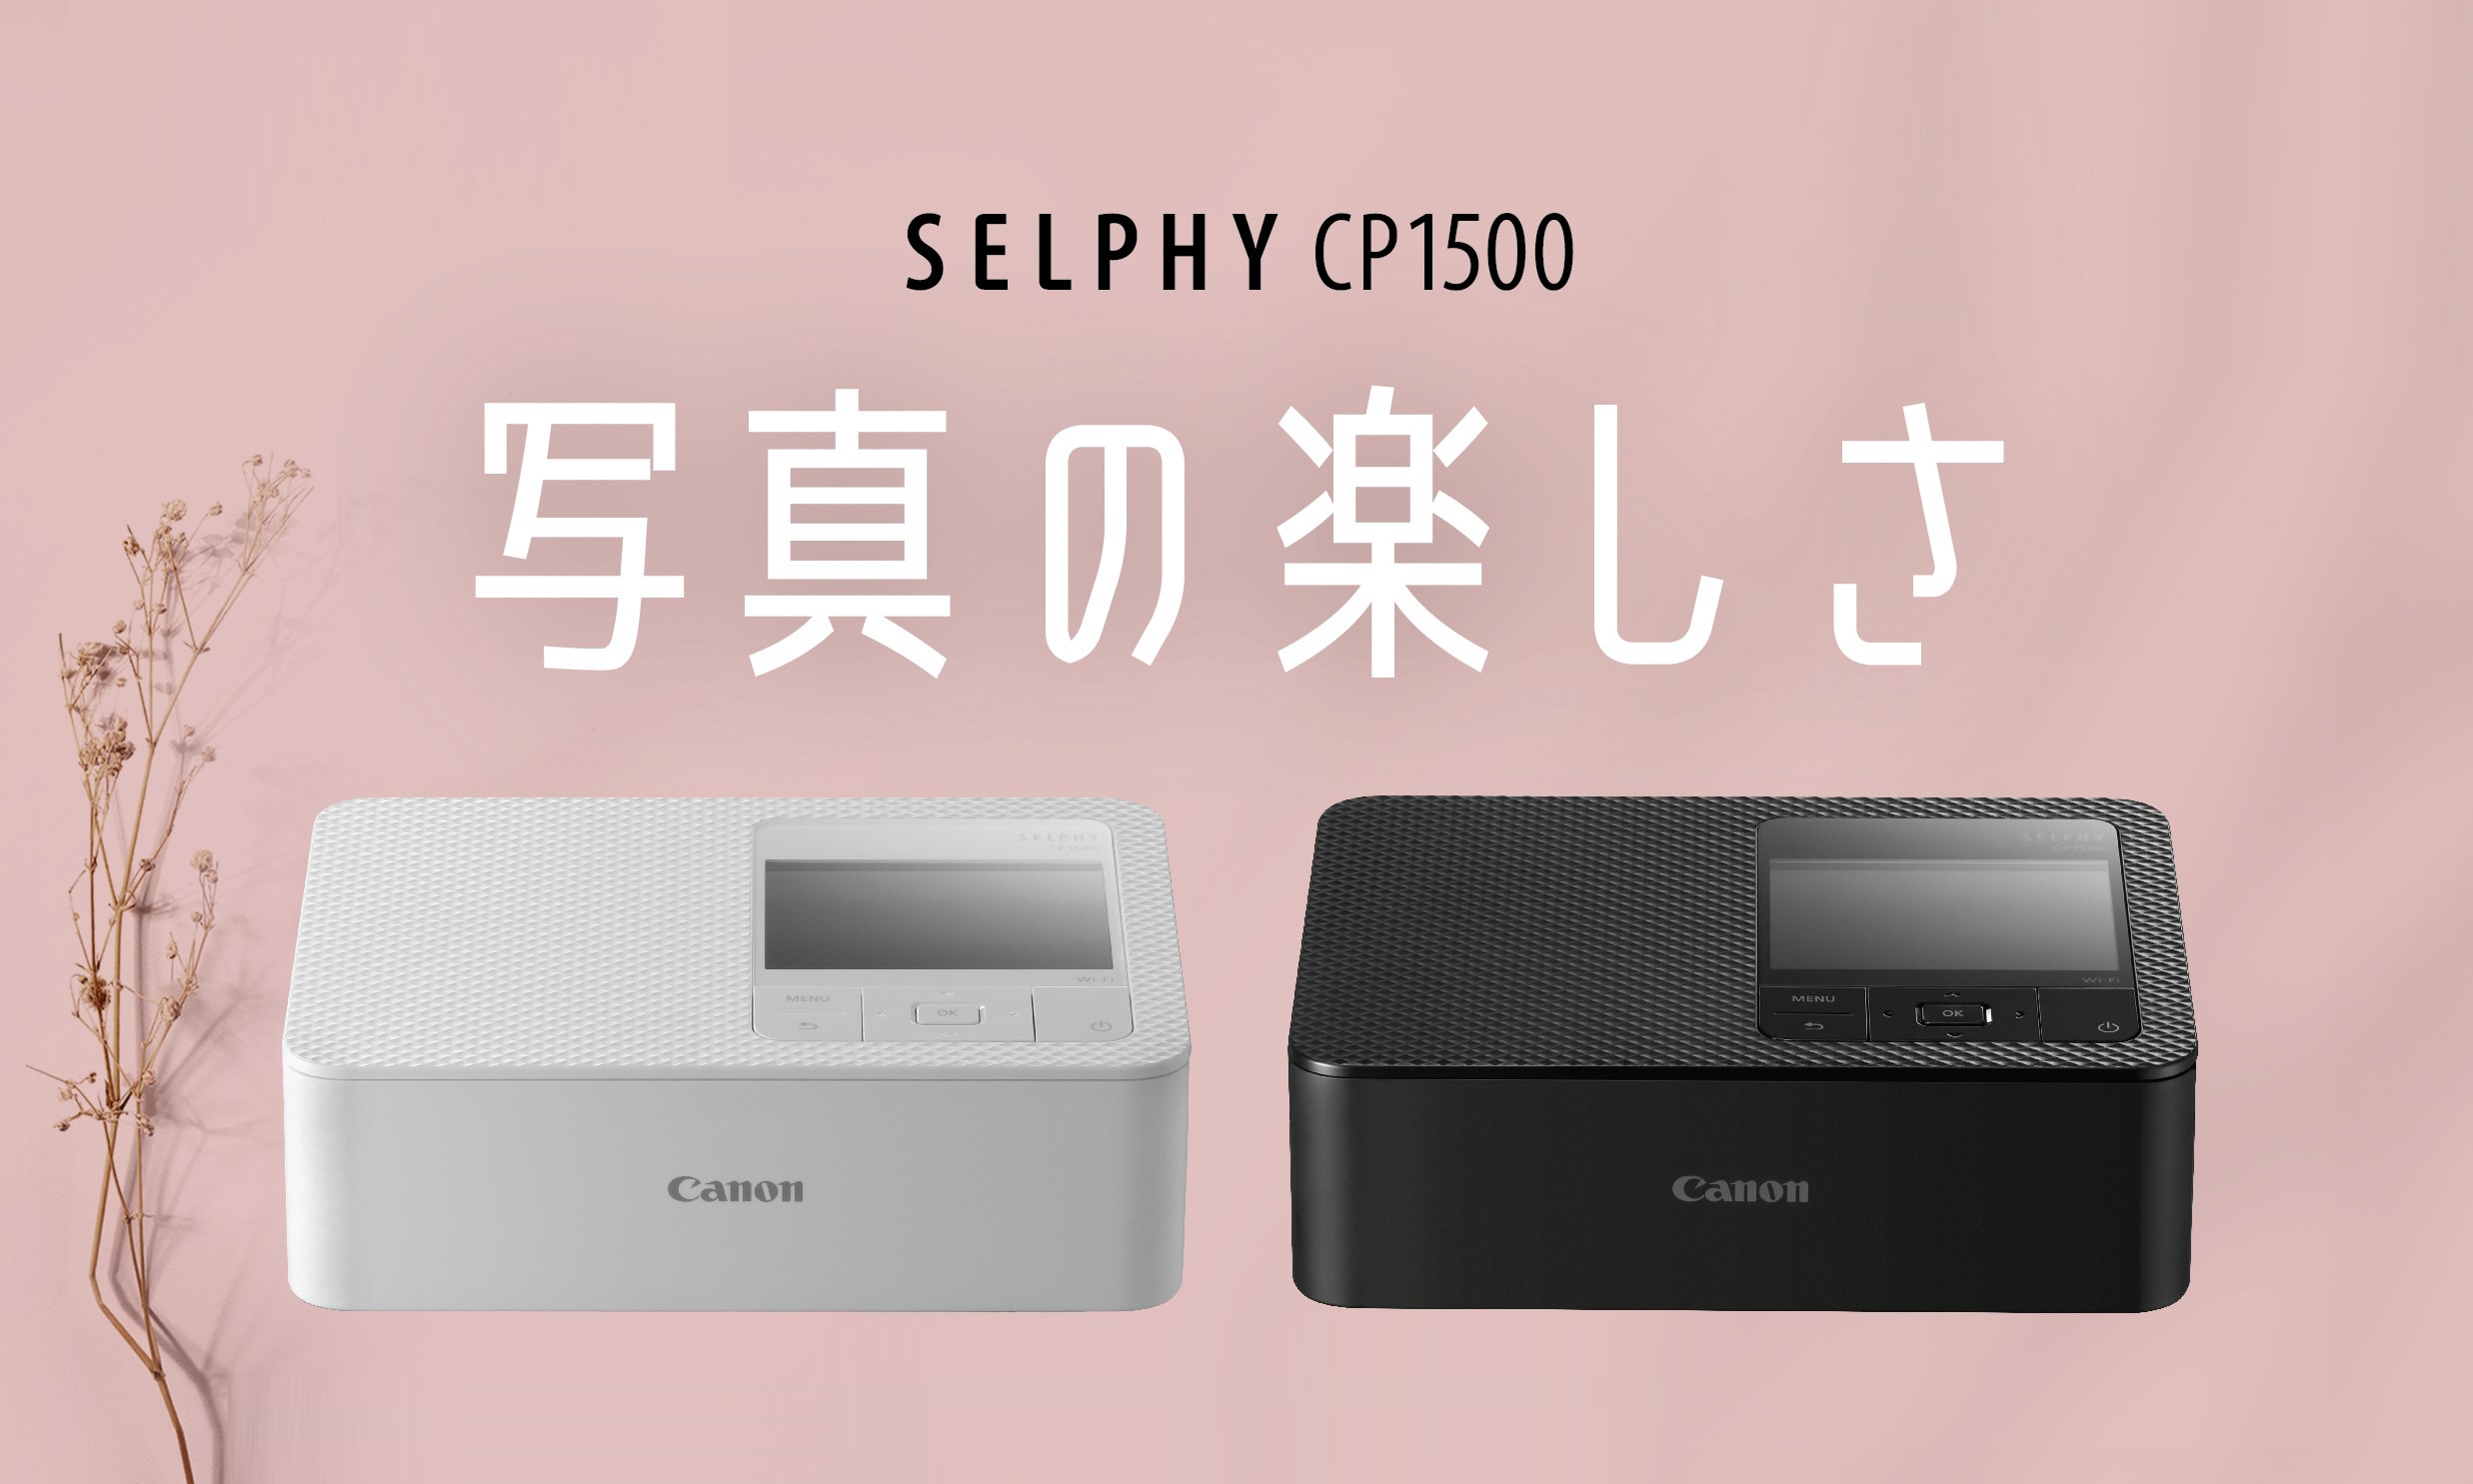 Canon Officially Launches the New SELPHY CP1500 Compact Photo